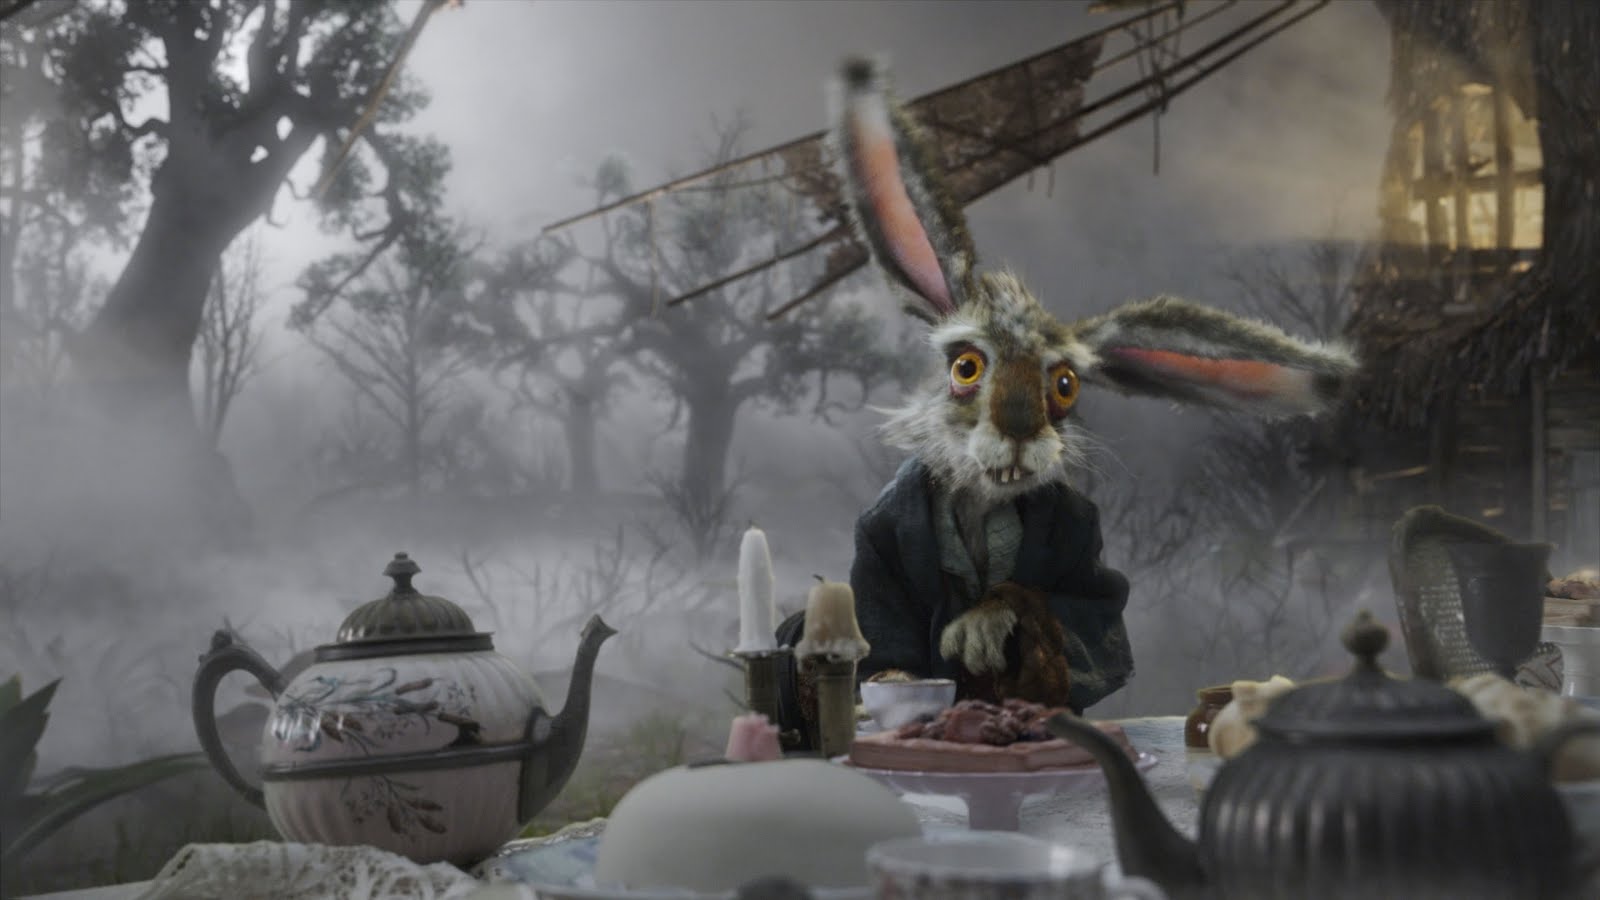 BC's Movie and Television Blog: Alice In Wonderland